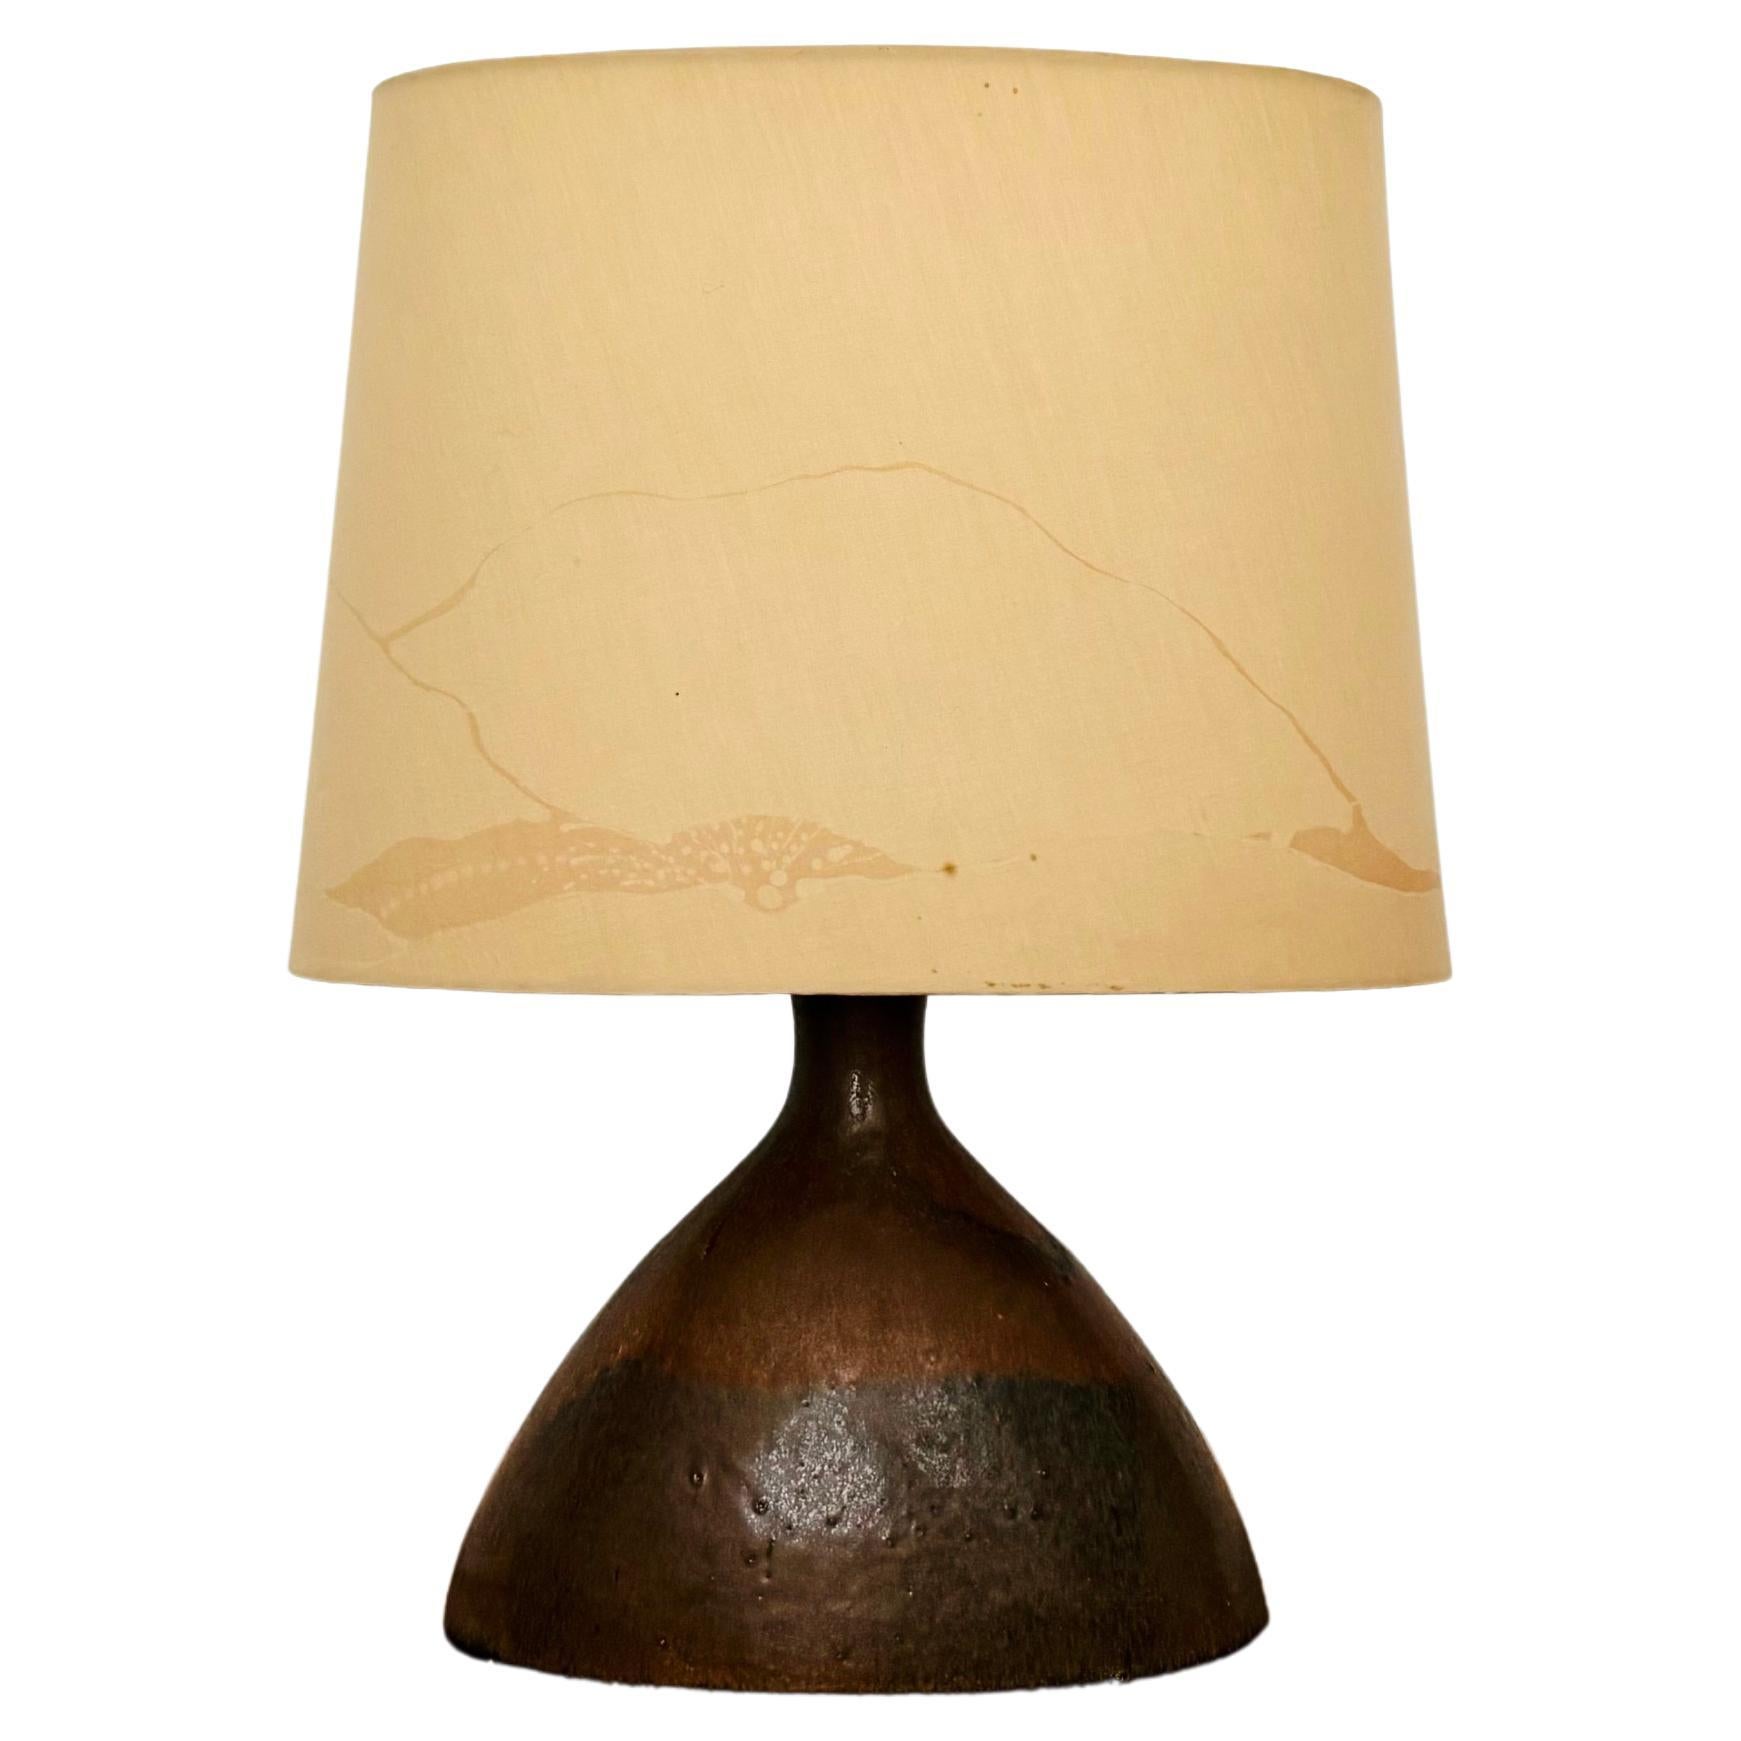 Ceramic Table Lamp For Sale